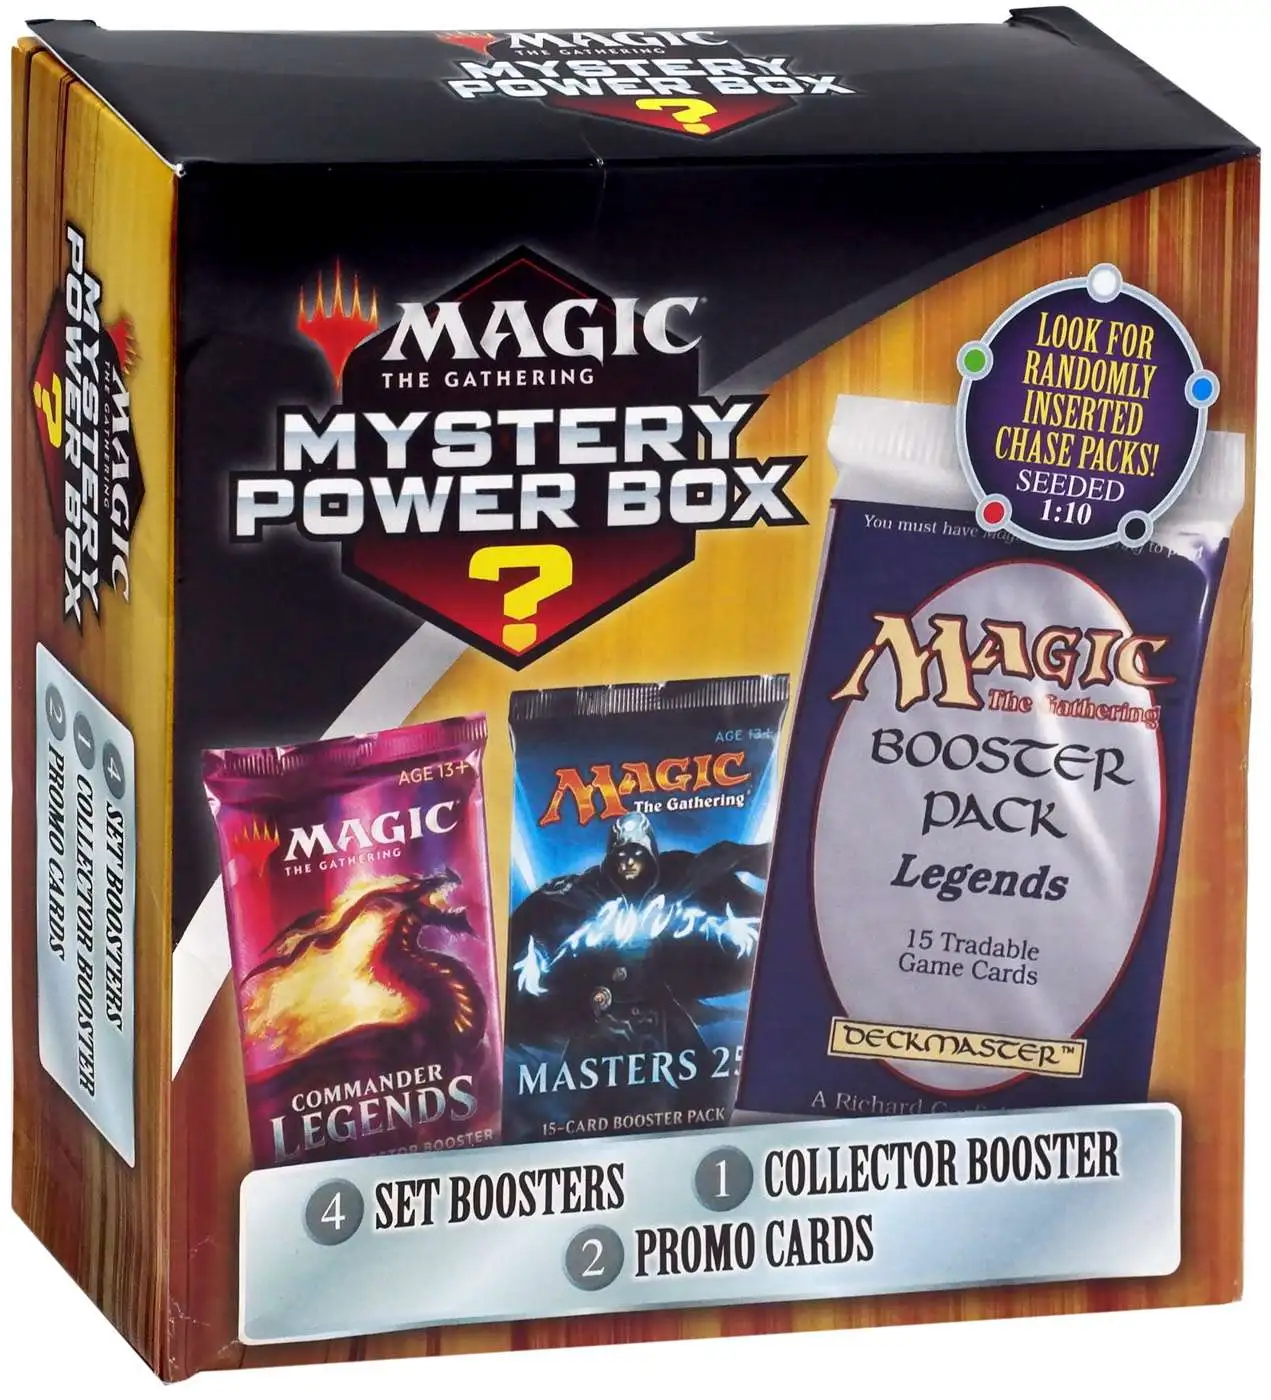 Magic The Gathering Trading Card Game Mystery Power Box 4 Set